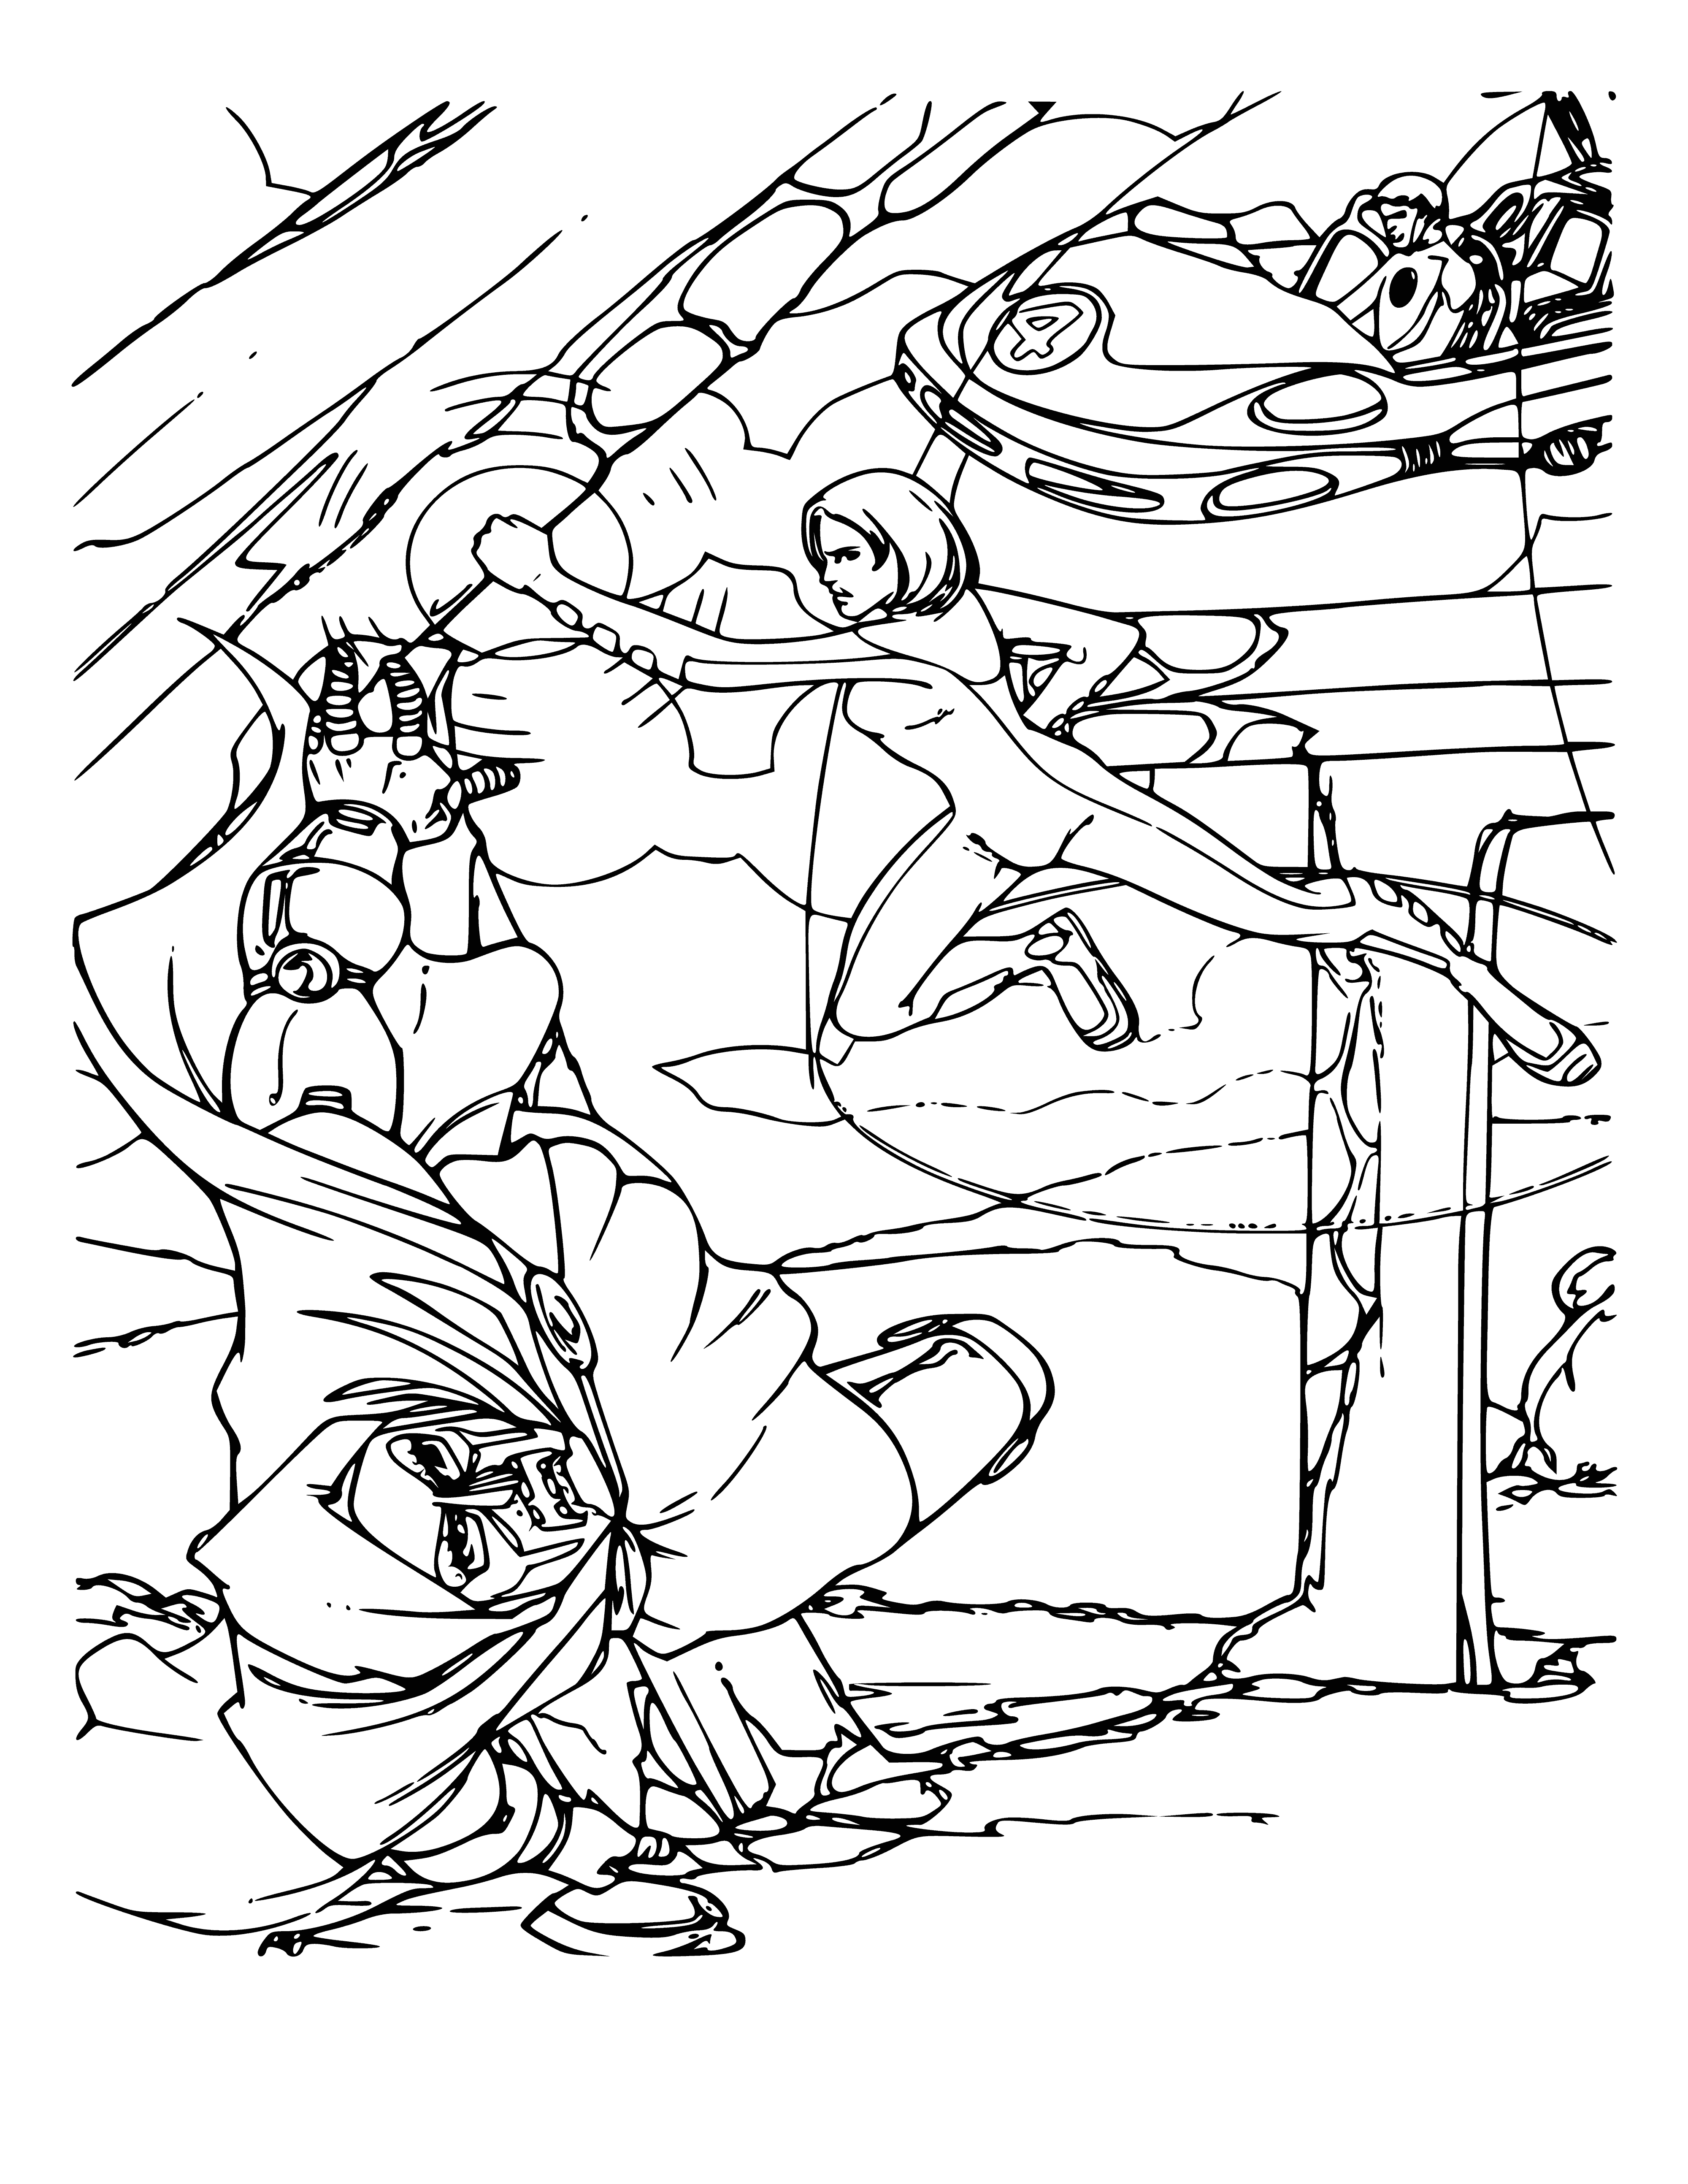 Force field coloring page